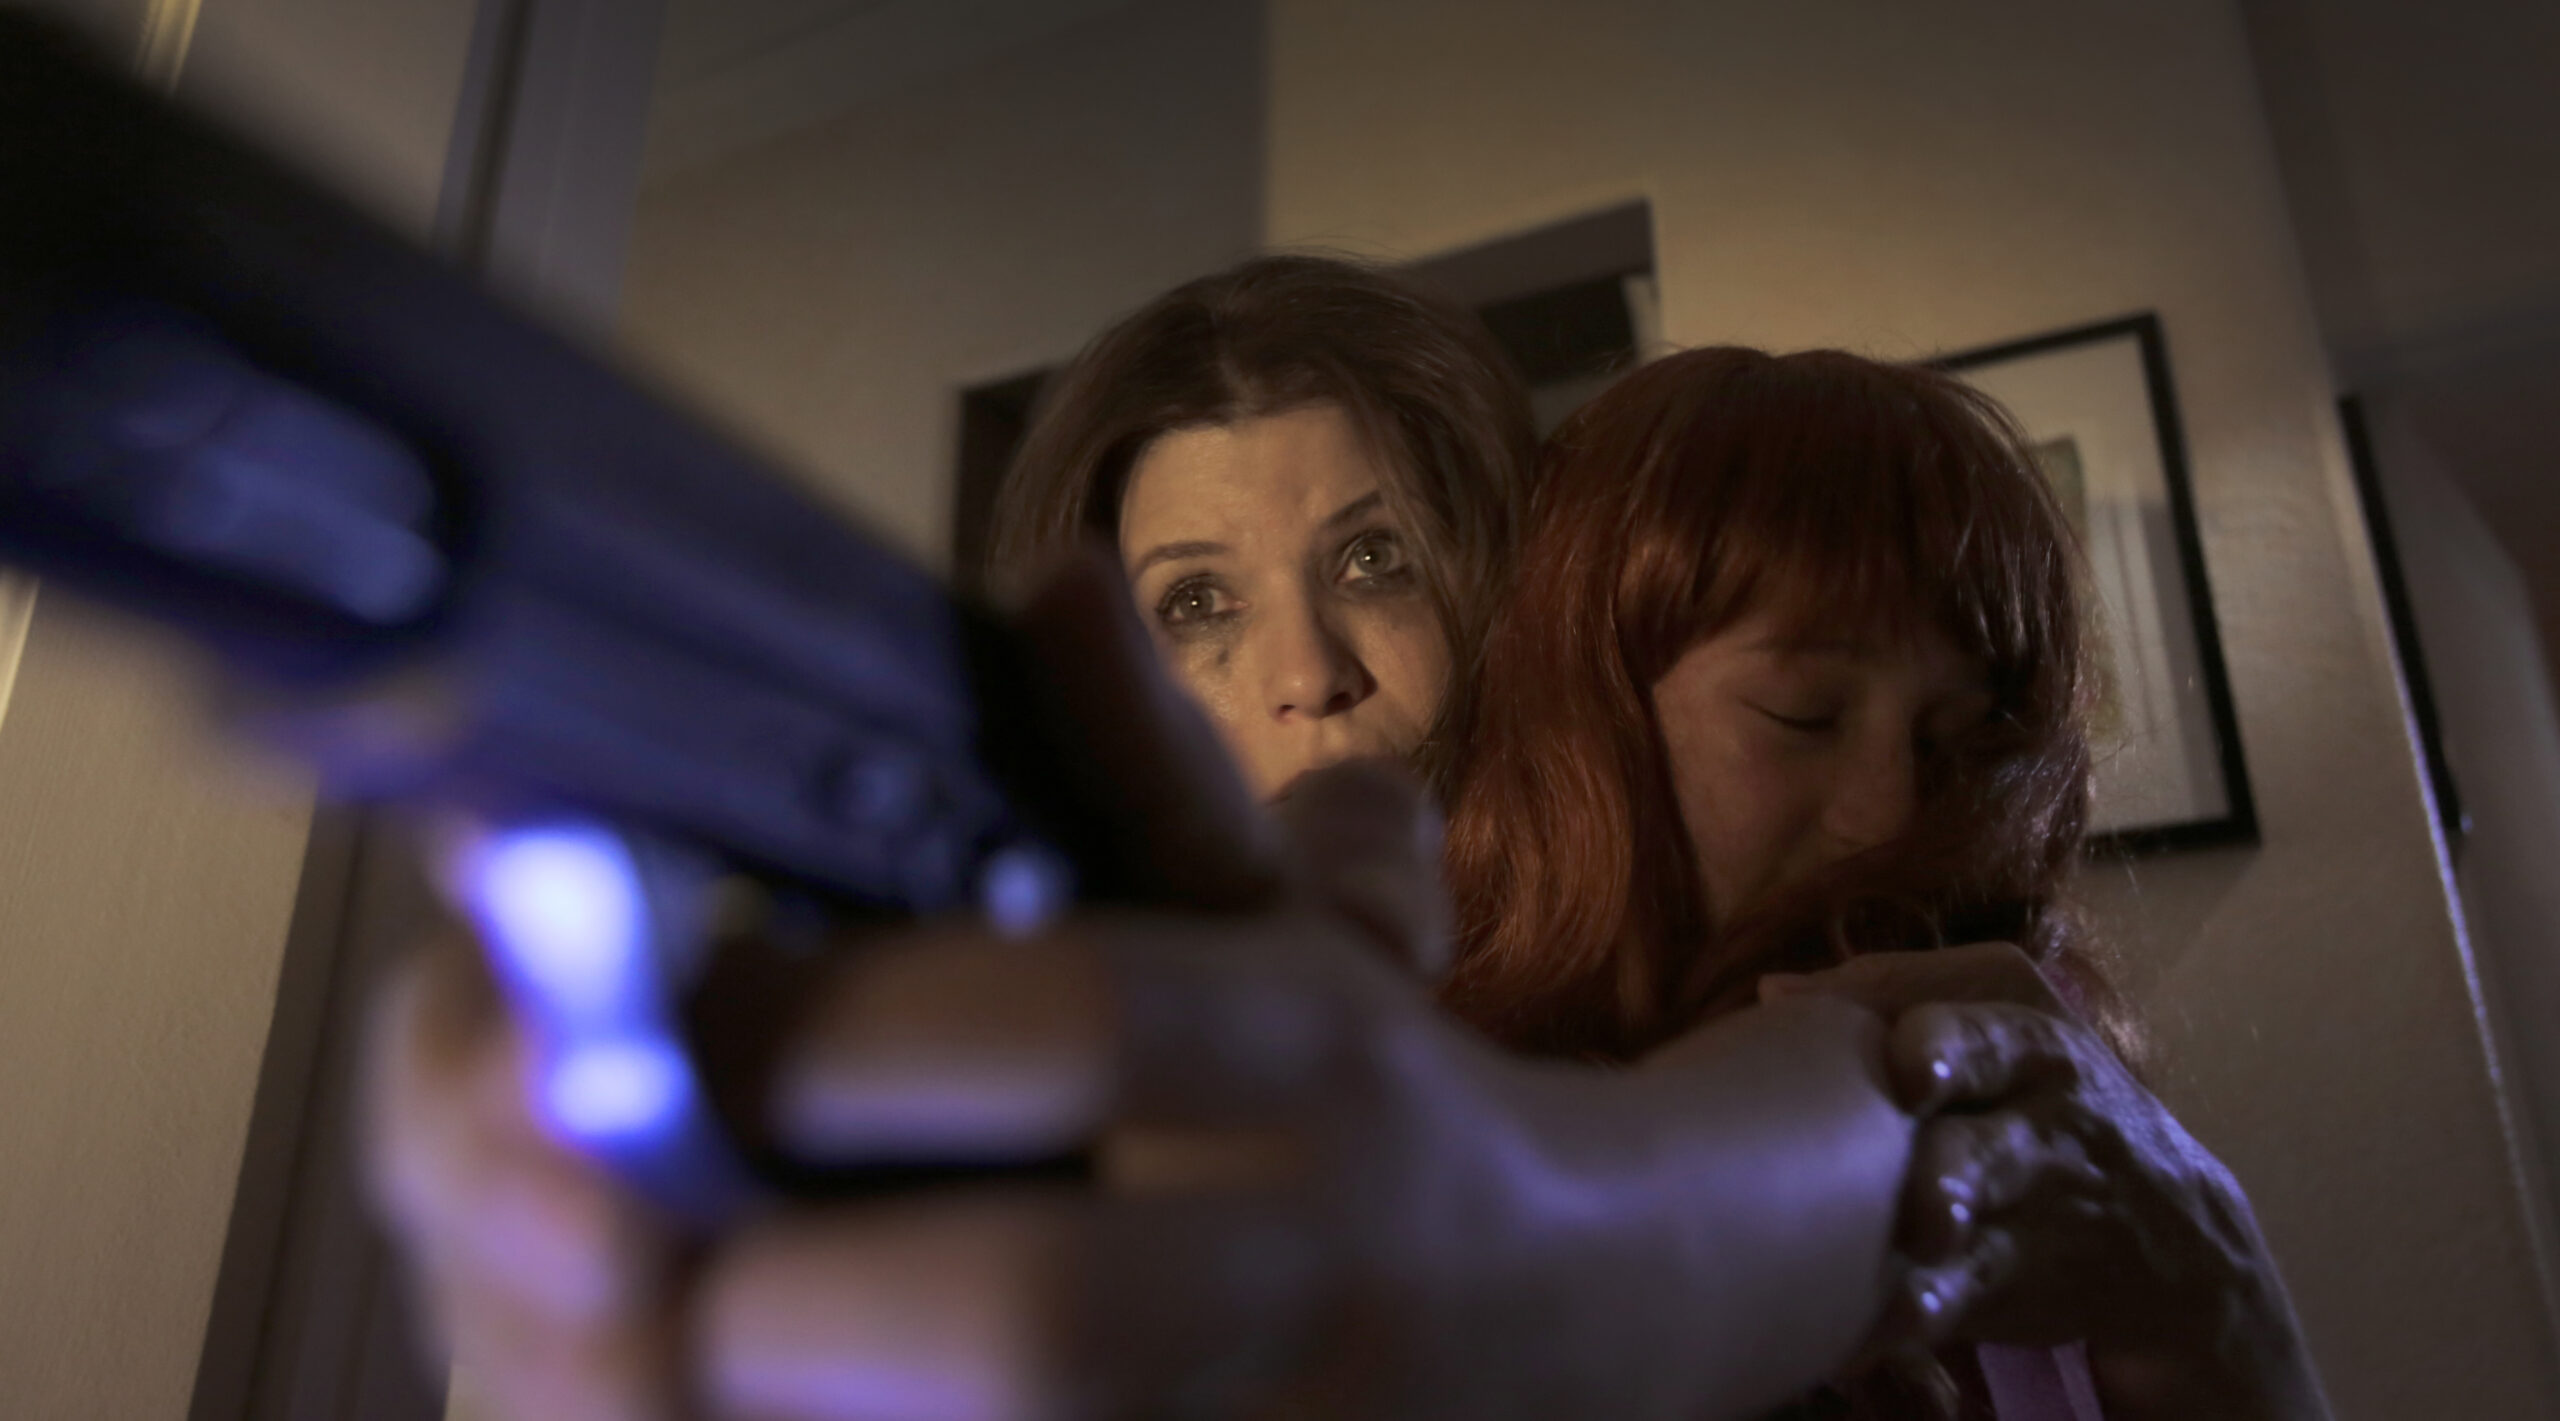 Tammy Klein and Jessica Bassuk in a tense moment from Pirromount Pictures' "Rage of Innocence" (2014)